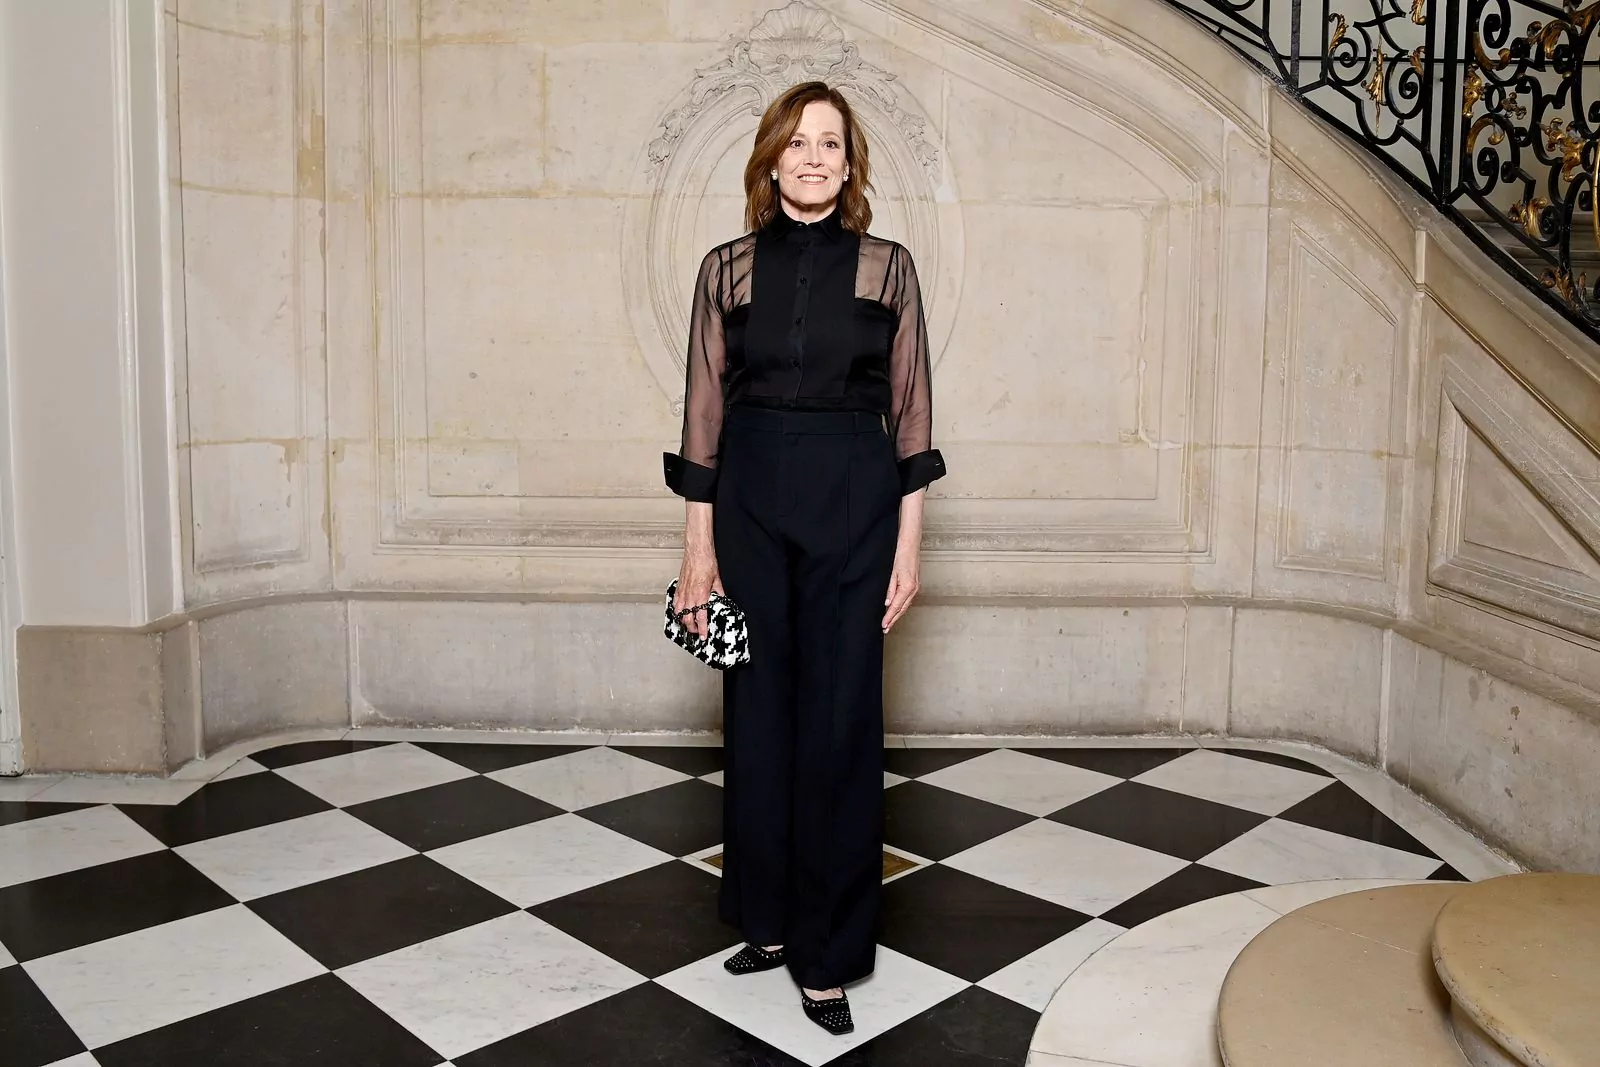 Sigourney Weaver at the Christian Dior Haute Couture fall-winter 2022-23 show during Paris Fashion Week, July 4, 2022.